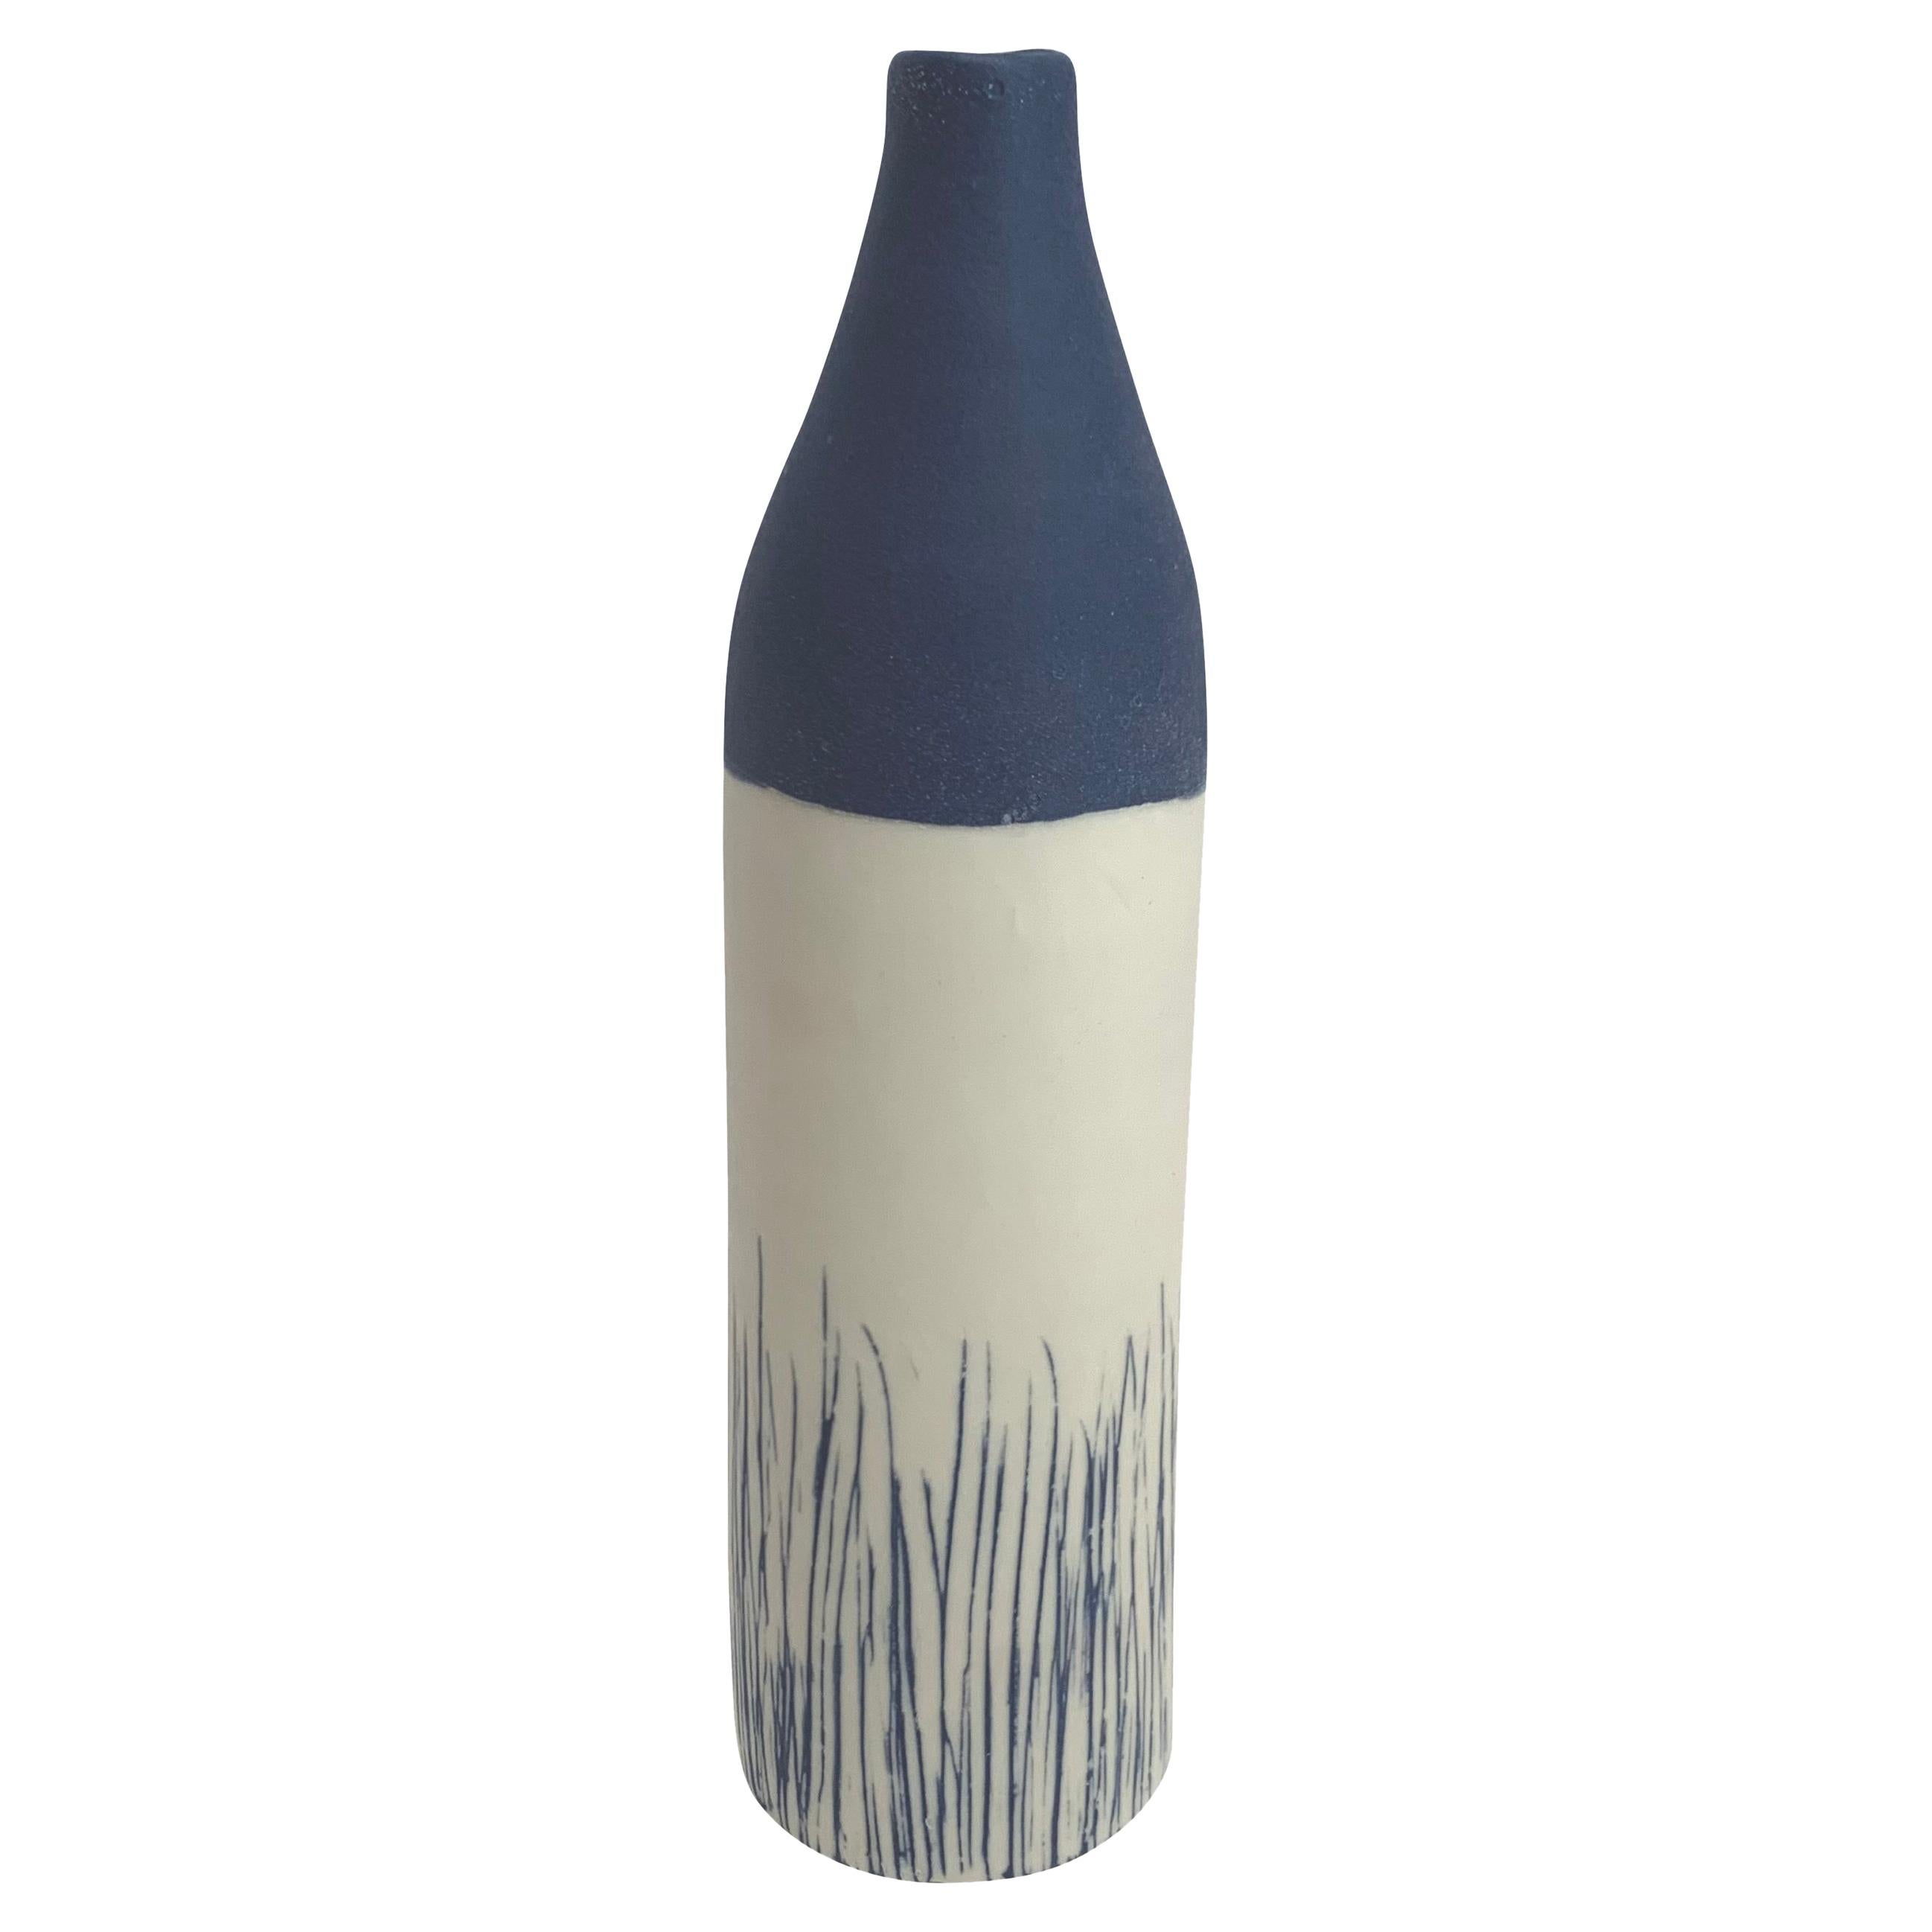 White with Blue Grass Blades Design Hand Made Thin Vase, Italy, Contemporary